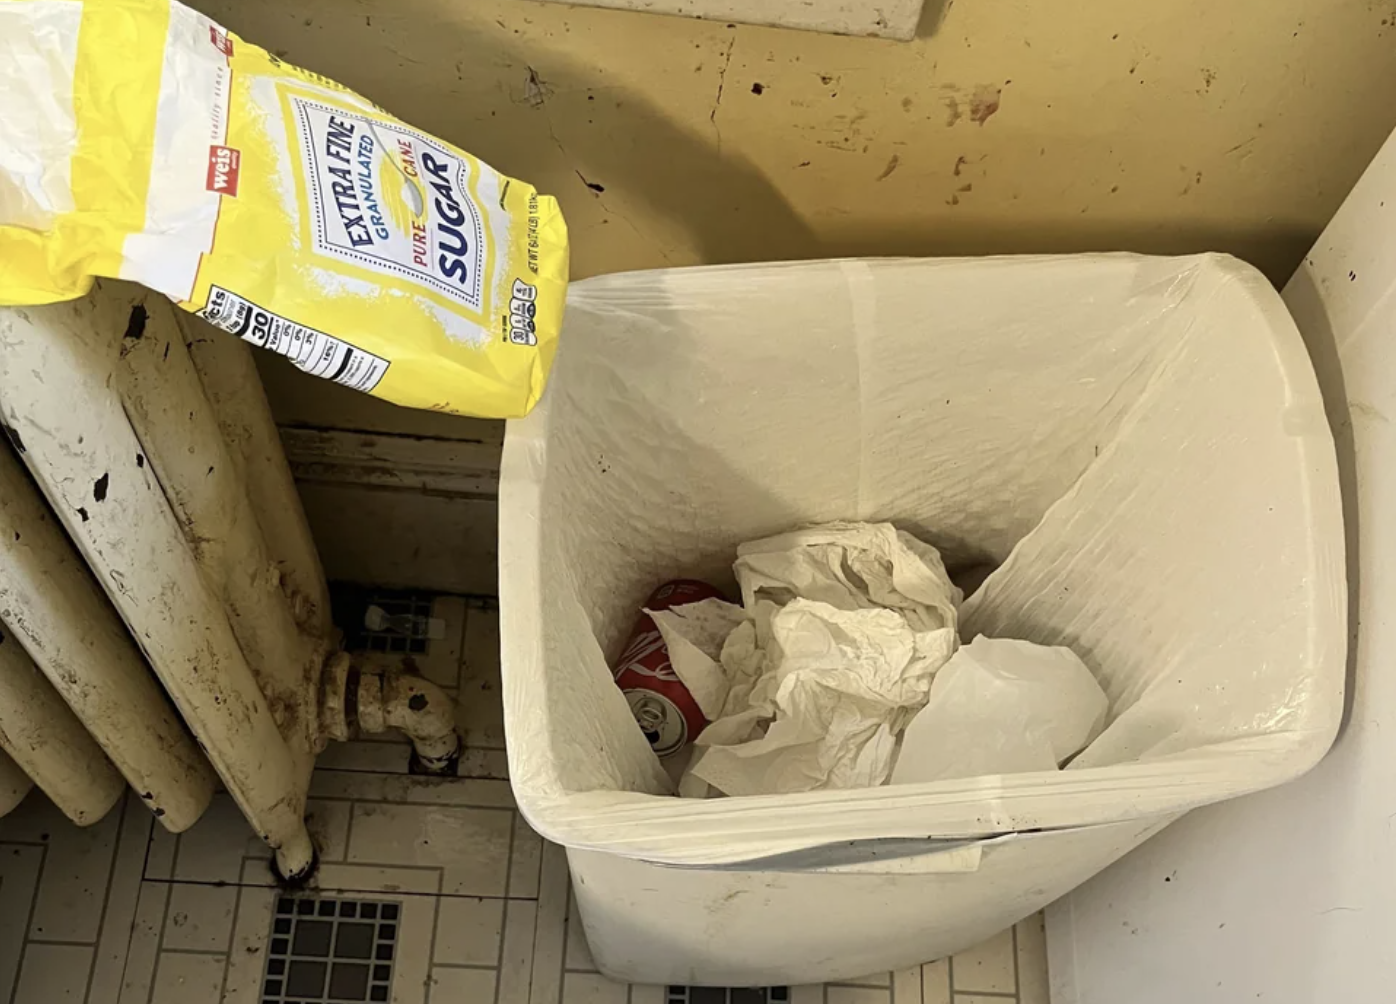 A piece of trash that was placed next to trash can instead of inside of it